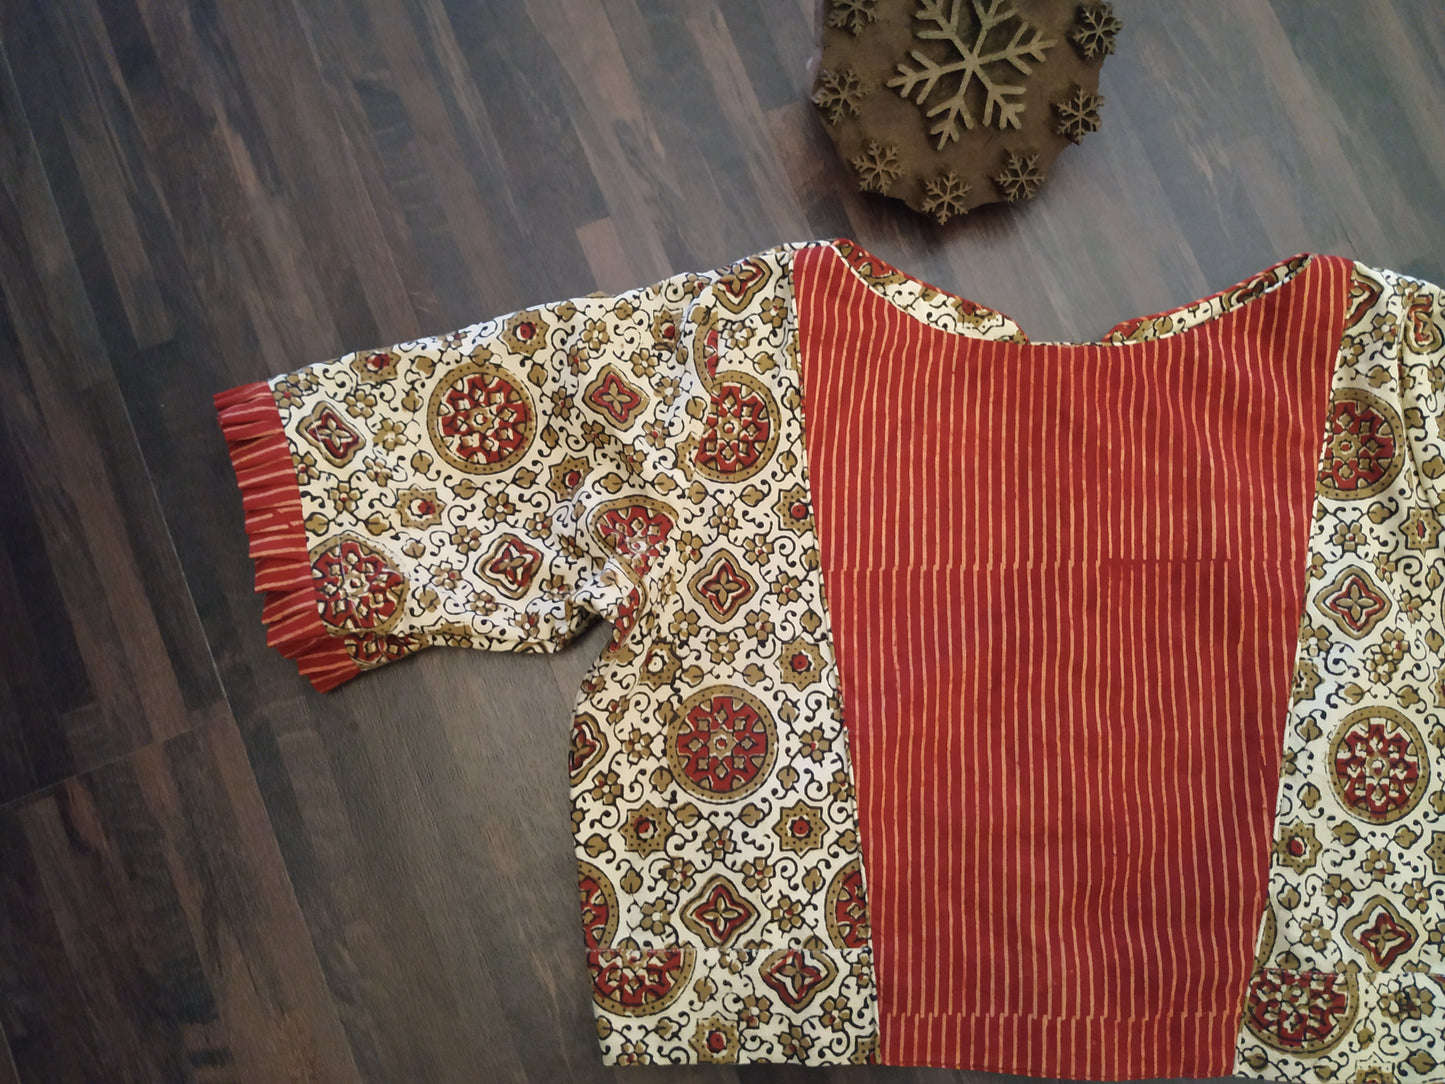 Handcrafted Maroon & Beige blouse